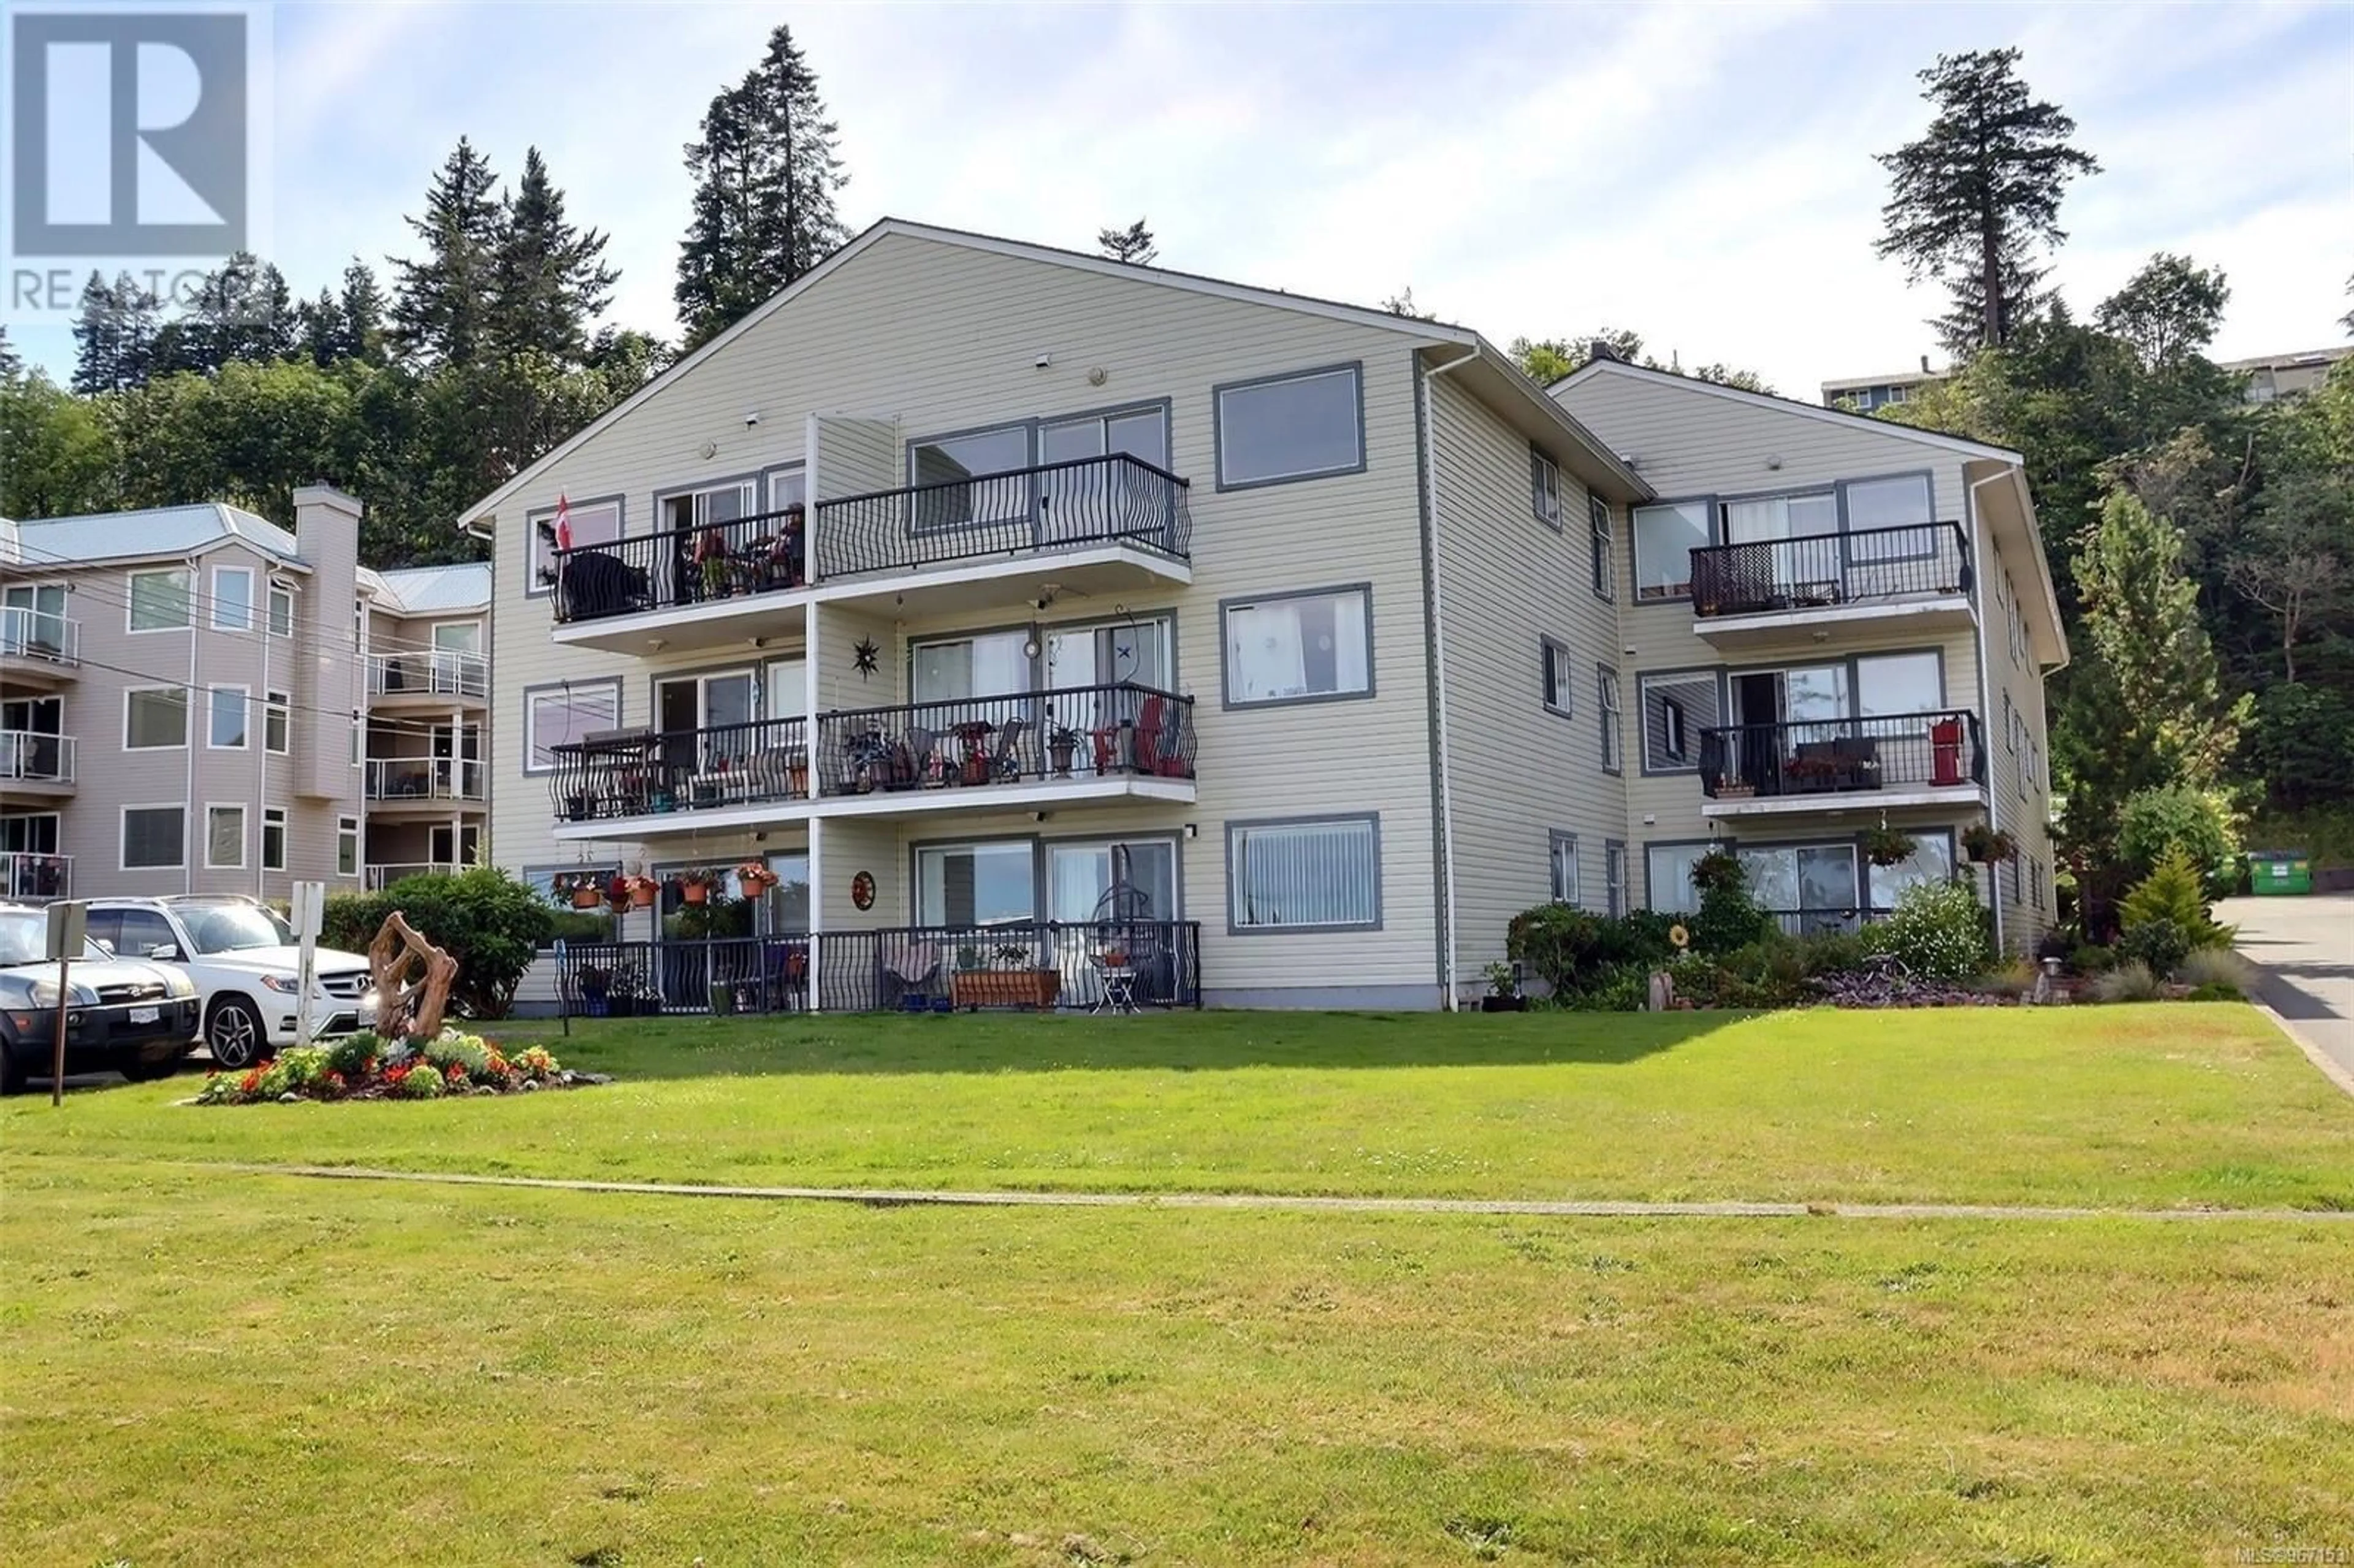 A pic from exterior of the house or condo for 310 622 Island Hwy S, Campbell River British Columbia V9W1A6